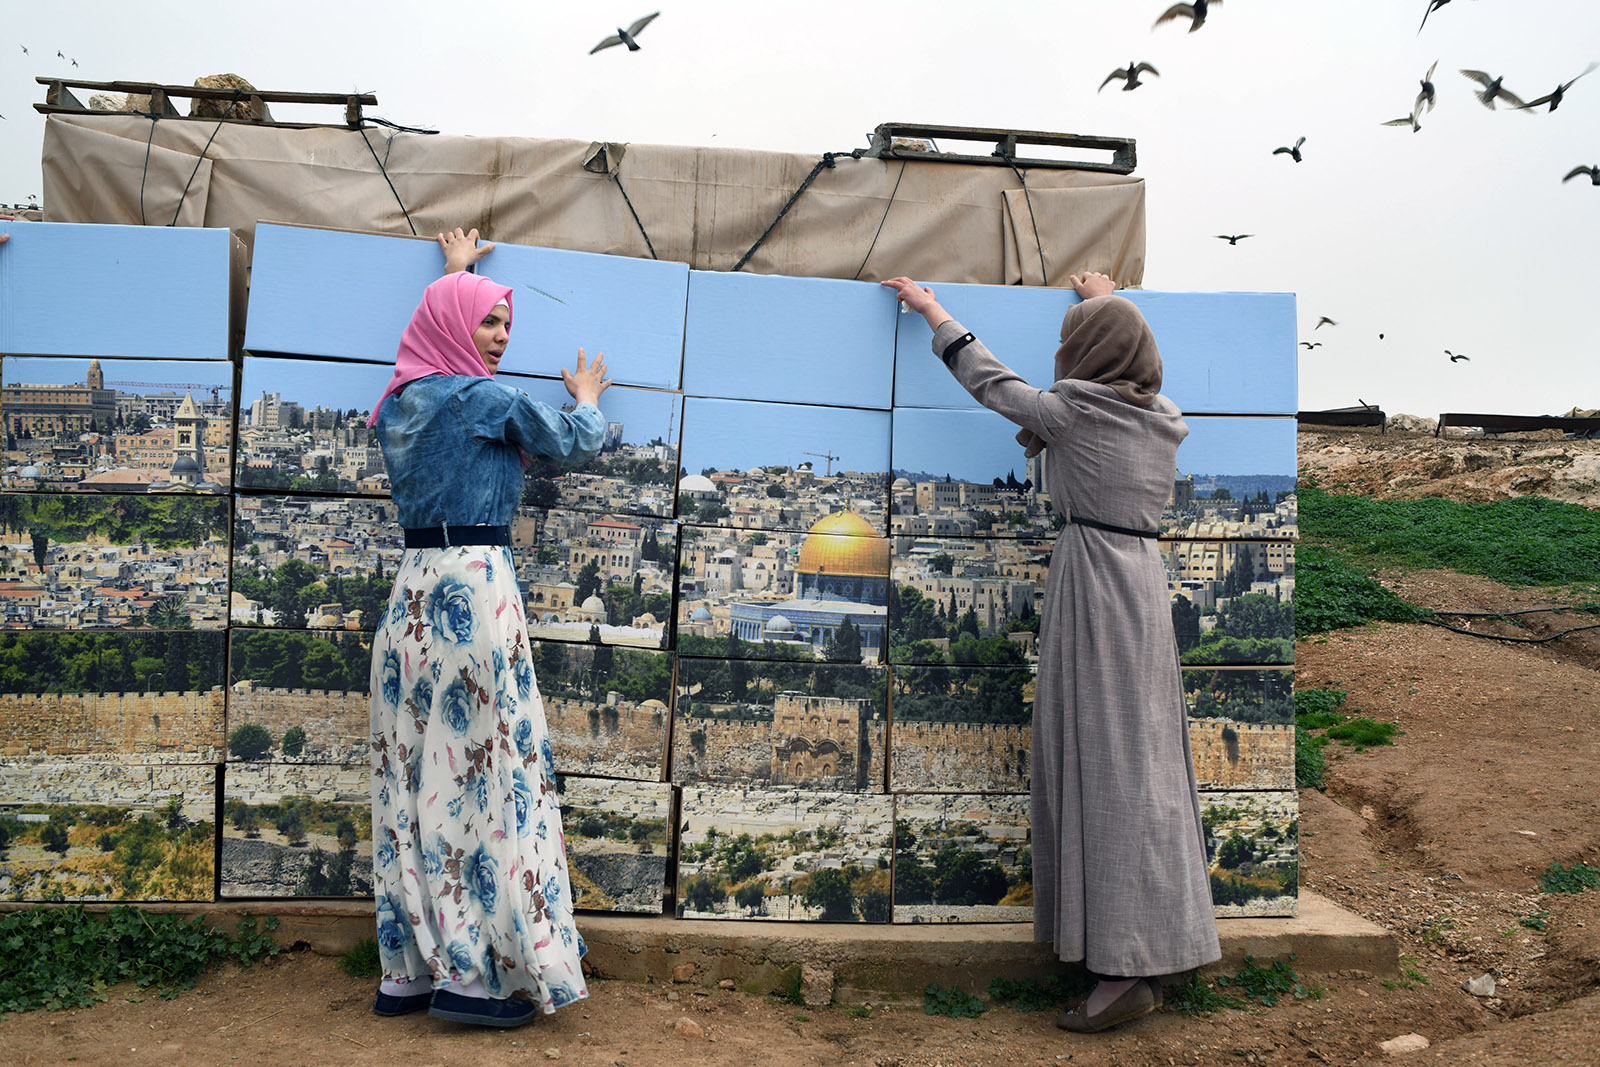 Two Palestinian women stand beside a patchwork image of the Al-Aqsa Mosque in Jerusalem. The photograph is printed at body-height scale, and split into circa 30 centimetre-wide segments. Around the women, birds fly through a grey sky